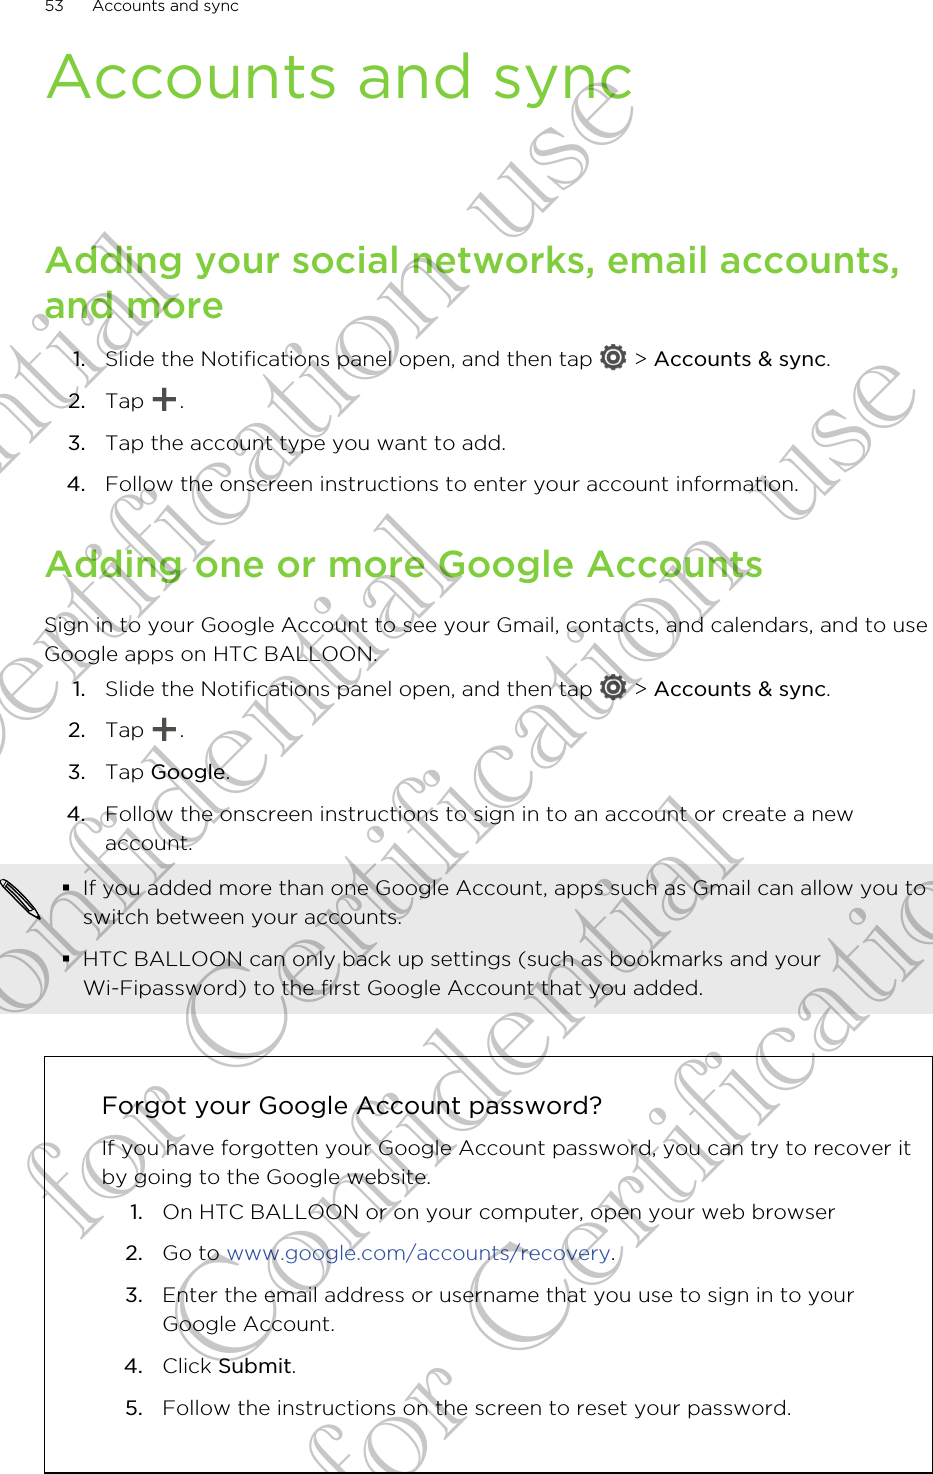 Accounts and syncAdding your social networks, email accounts,and more1. Slide the Notifications panel open, and then tap   &gt; Accounts &amp; sync.2. Tap  .3. Tap the account type you want to add.4. Follow the onscreen instructions to enter your account information.Adding one or more Google AccountsSign in to your Google Account to see your Gmail, contacts, and calendars, and to useGoogle apps on HTC BALLOON.1. Slide the Notifications panel open, and then tap   &gt; Accounts &amp; sync.2. Tap  .3. Tap Google.4. Follow the onscreen instructions to sign in to an account or create a newaccount.§If you added more than one Google Account, apps such as Gmail can allow you toswitch between your accounts.§HTC BALLOON can only back up settings (such as bookmarks and yourWi-Fipassword) to the first Google Account that you added.Forgot your Google Account password?If you have forgotten your Google Account password, you can try to recover itby going to the Google website.1. On HTC BALLOON or on your computer, open your web browser2. Go to www.google.com/accounts/recovery.3. Enter the email address or username that you use to sign in to yourGoogle Account.4. Click Submit.5. Follow the instructions on the screen to reset your password.53 Accounts and syncConfidential for Certification use Confidential for Certification use Confidential for Certification use 